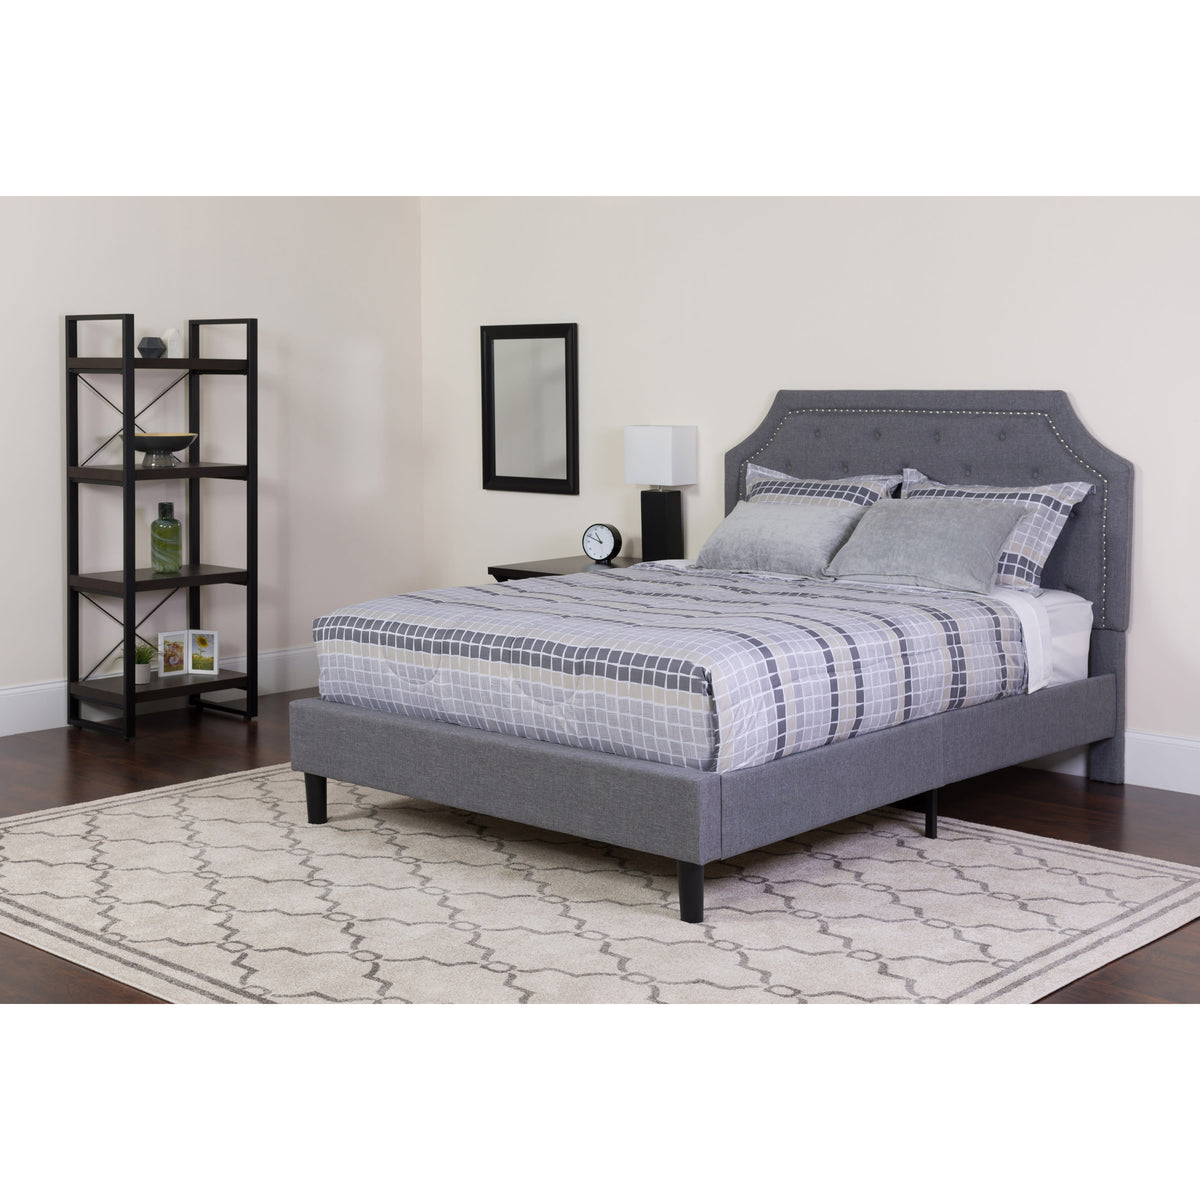 Light Gray,Twin |#| Twin Size Arched Tufted Light Gray Fabric Platform Bed with Memory Foam Mattress